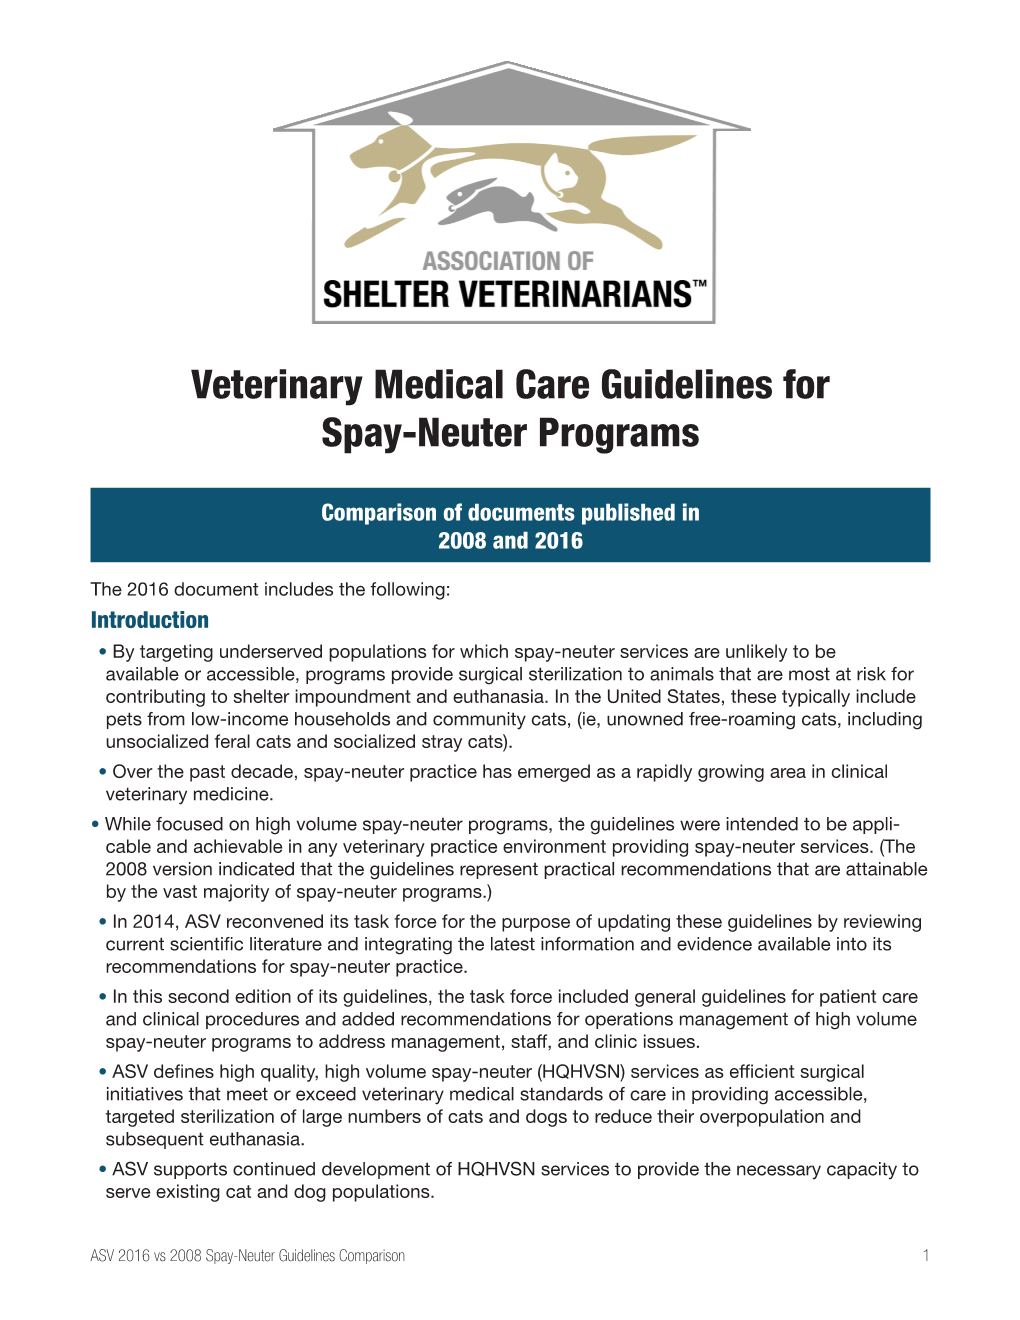 Veterinary Medical Care Guidelines for Spay-Neuter Programs